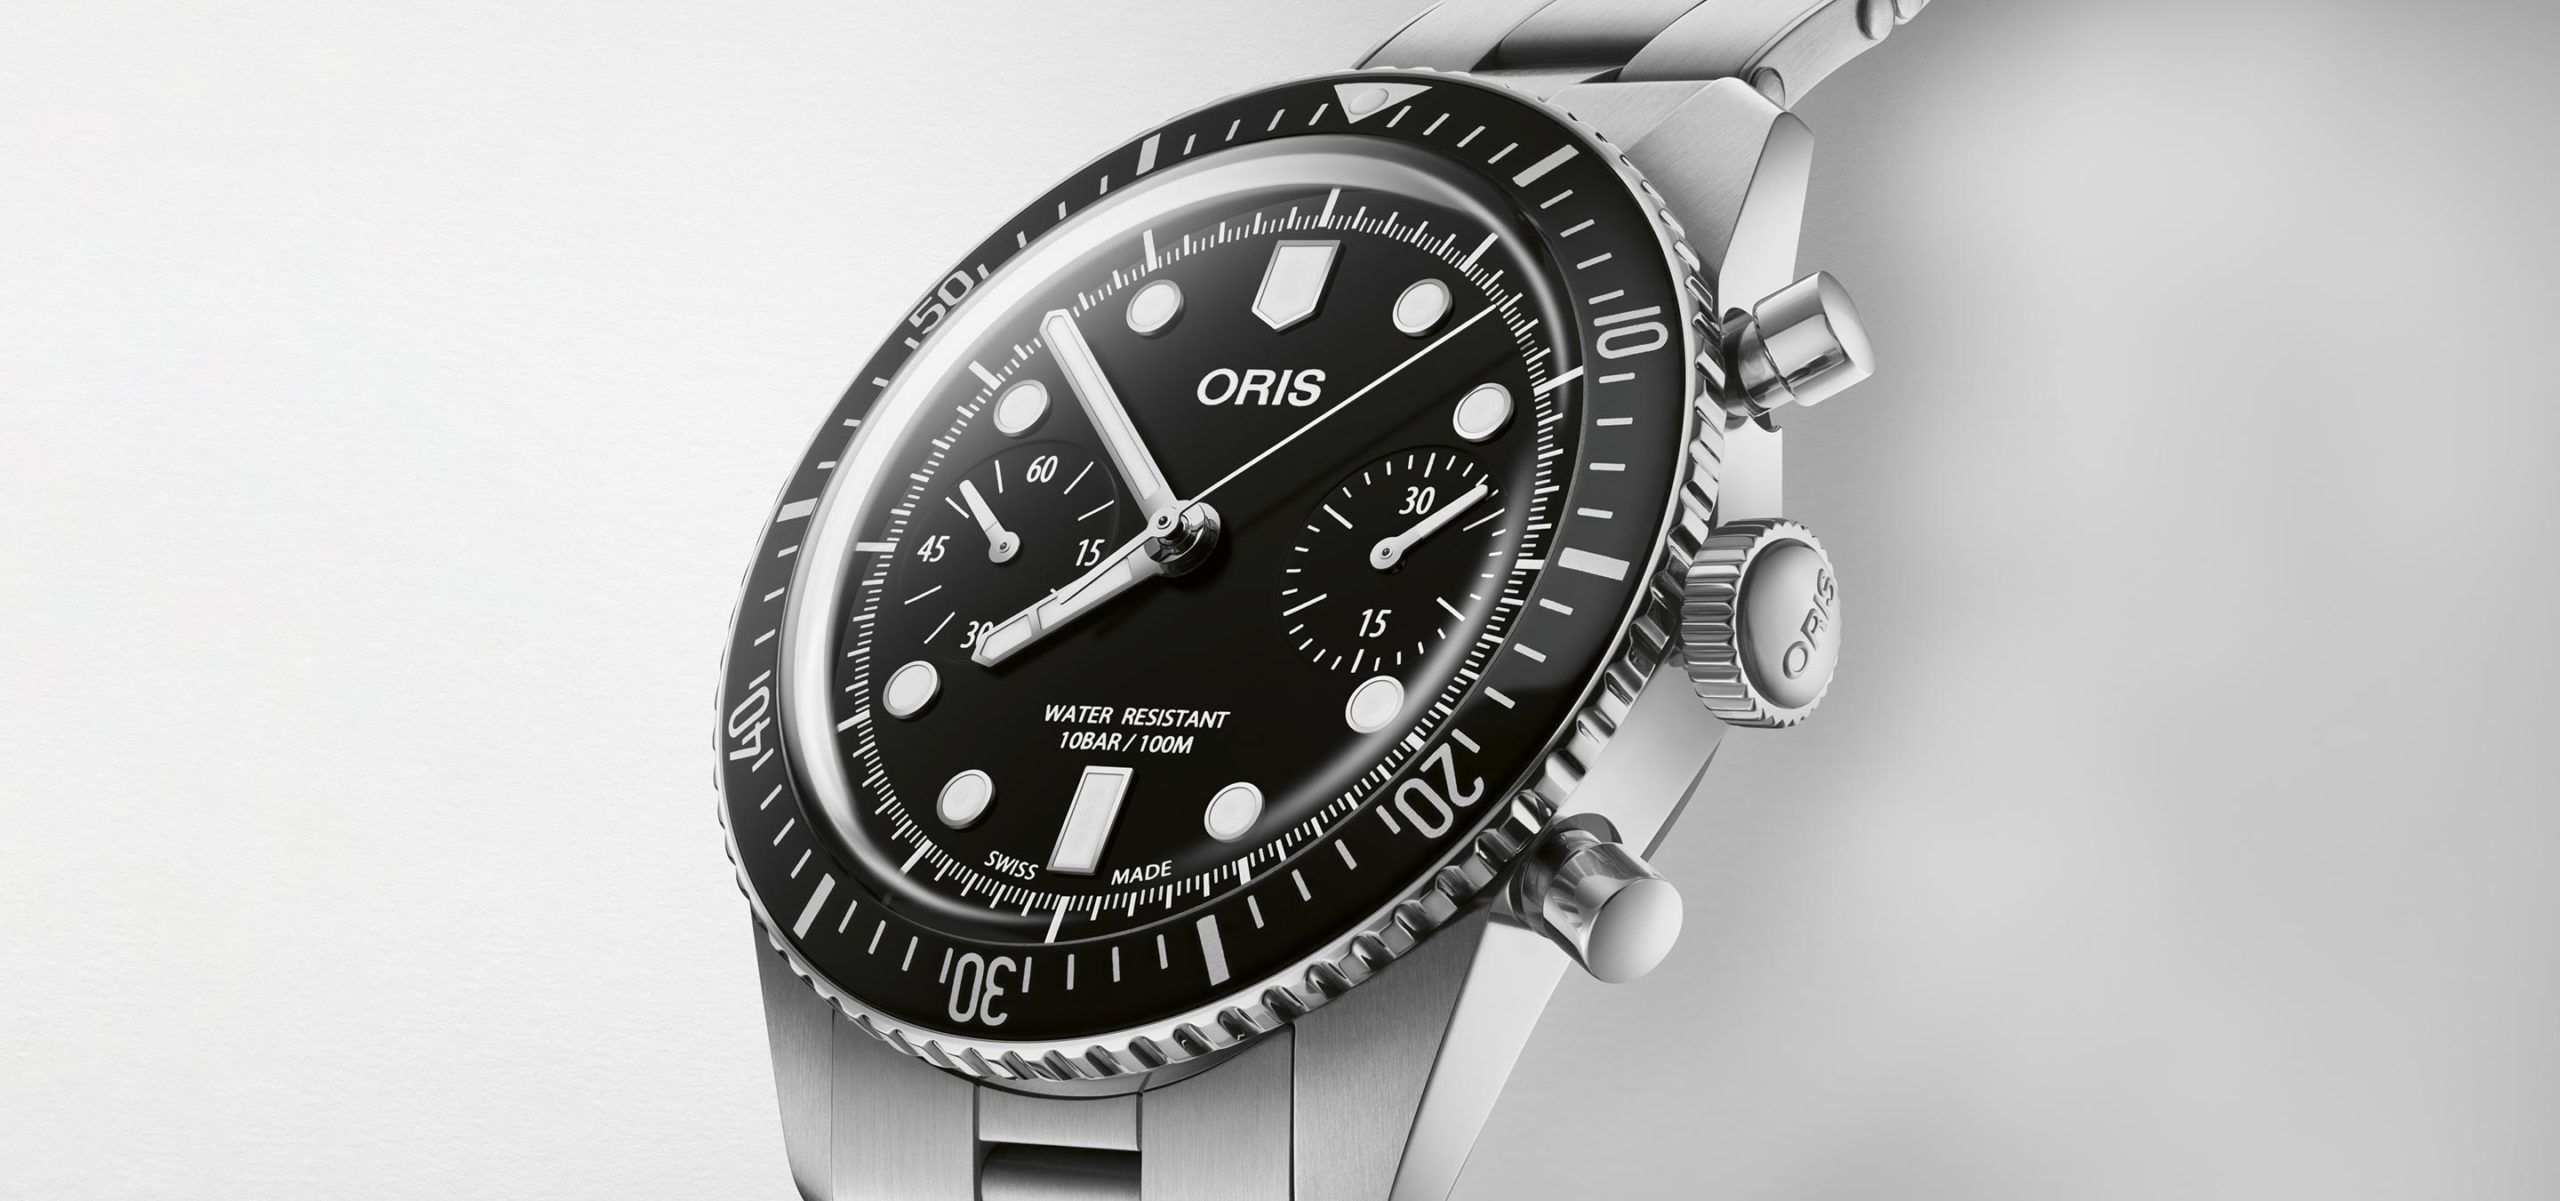 A Dash Of Nostalgia: Presenting The New Oris Divers Sixty-Five Chronograph